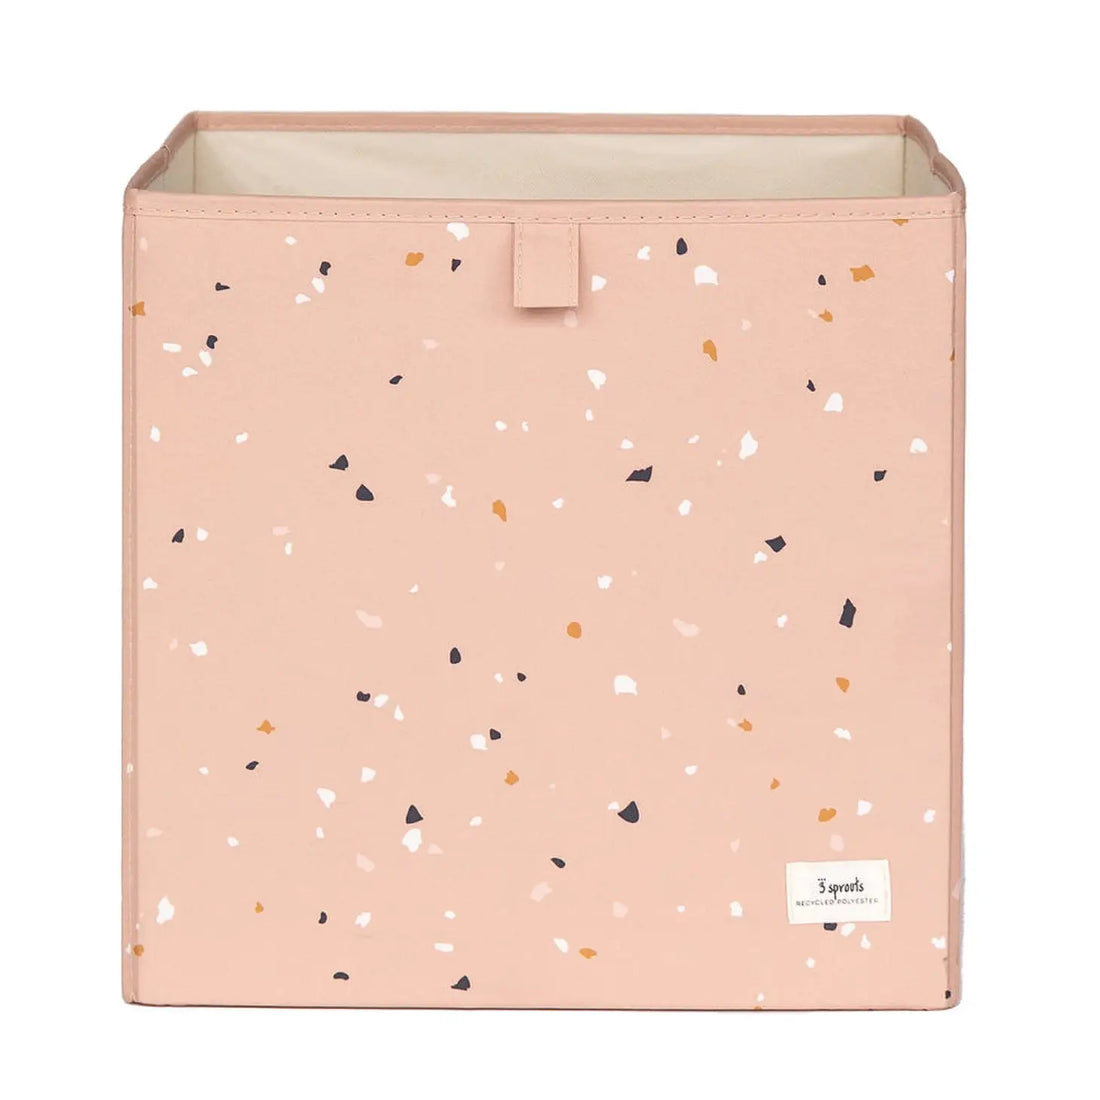 Recycled Fabric Storage Cube - Terrazzo Clay